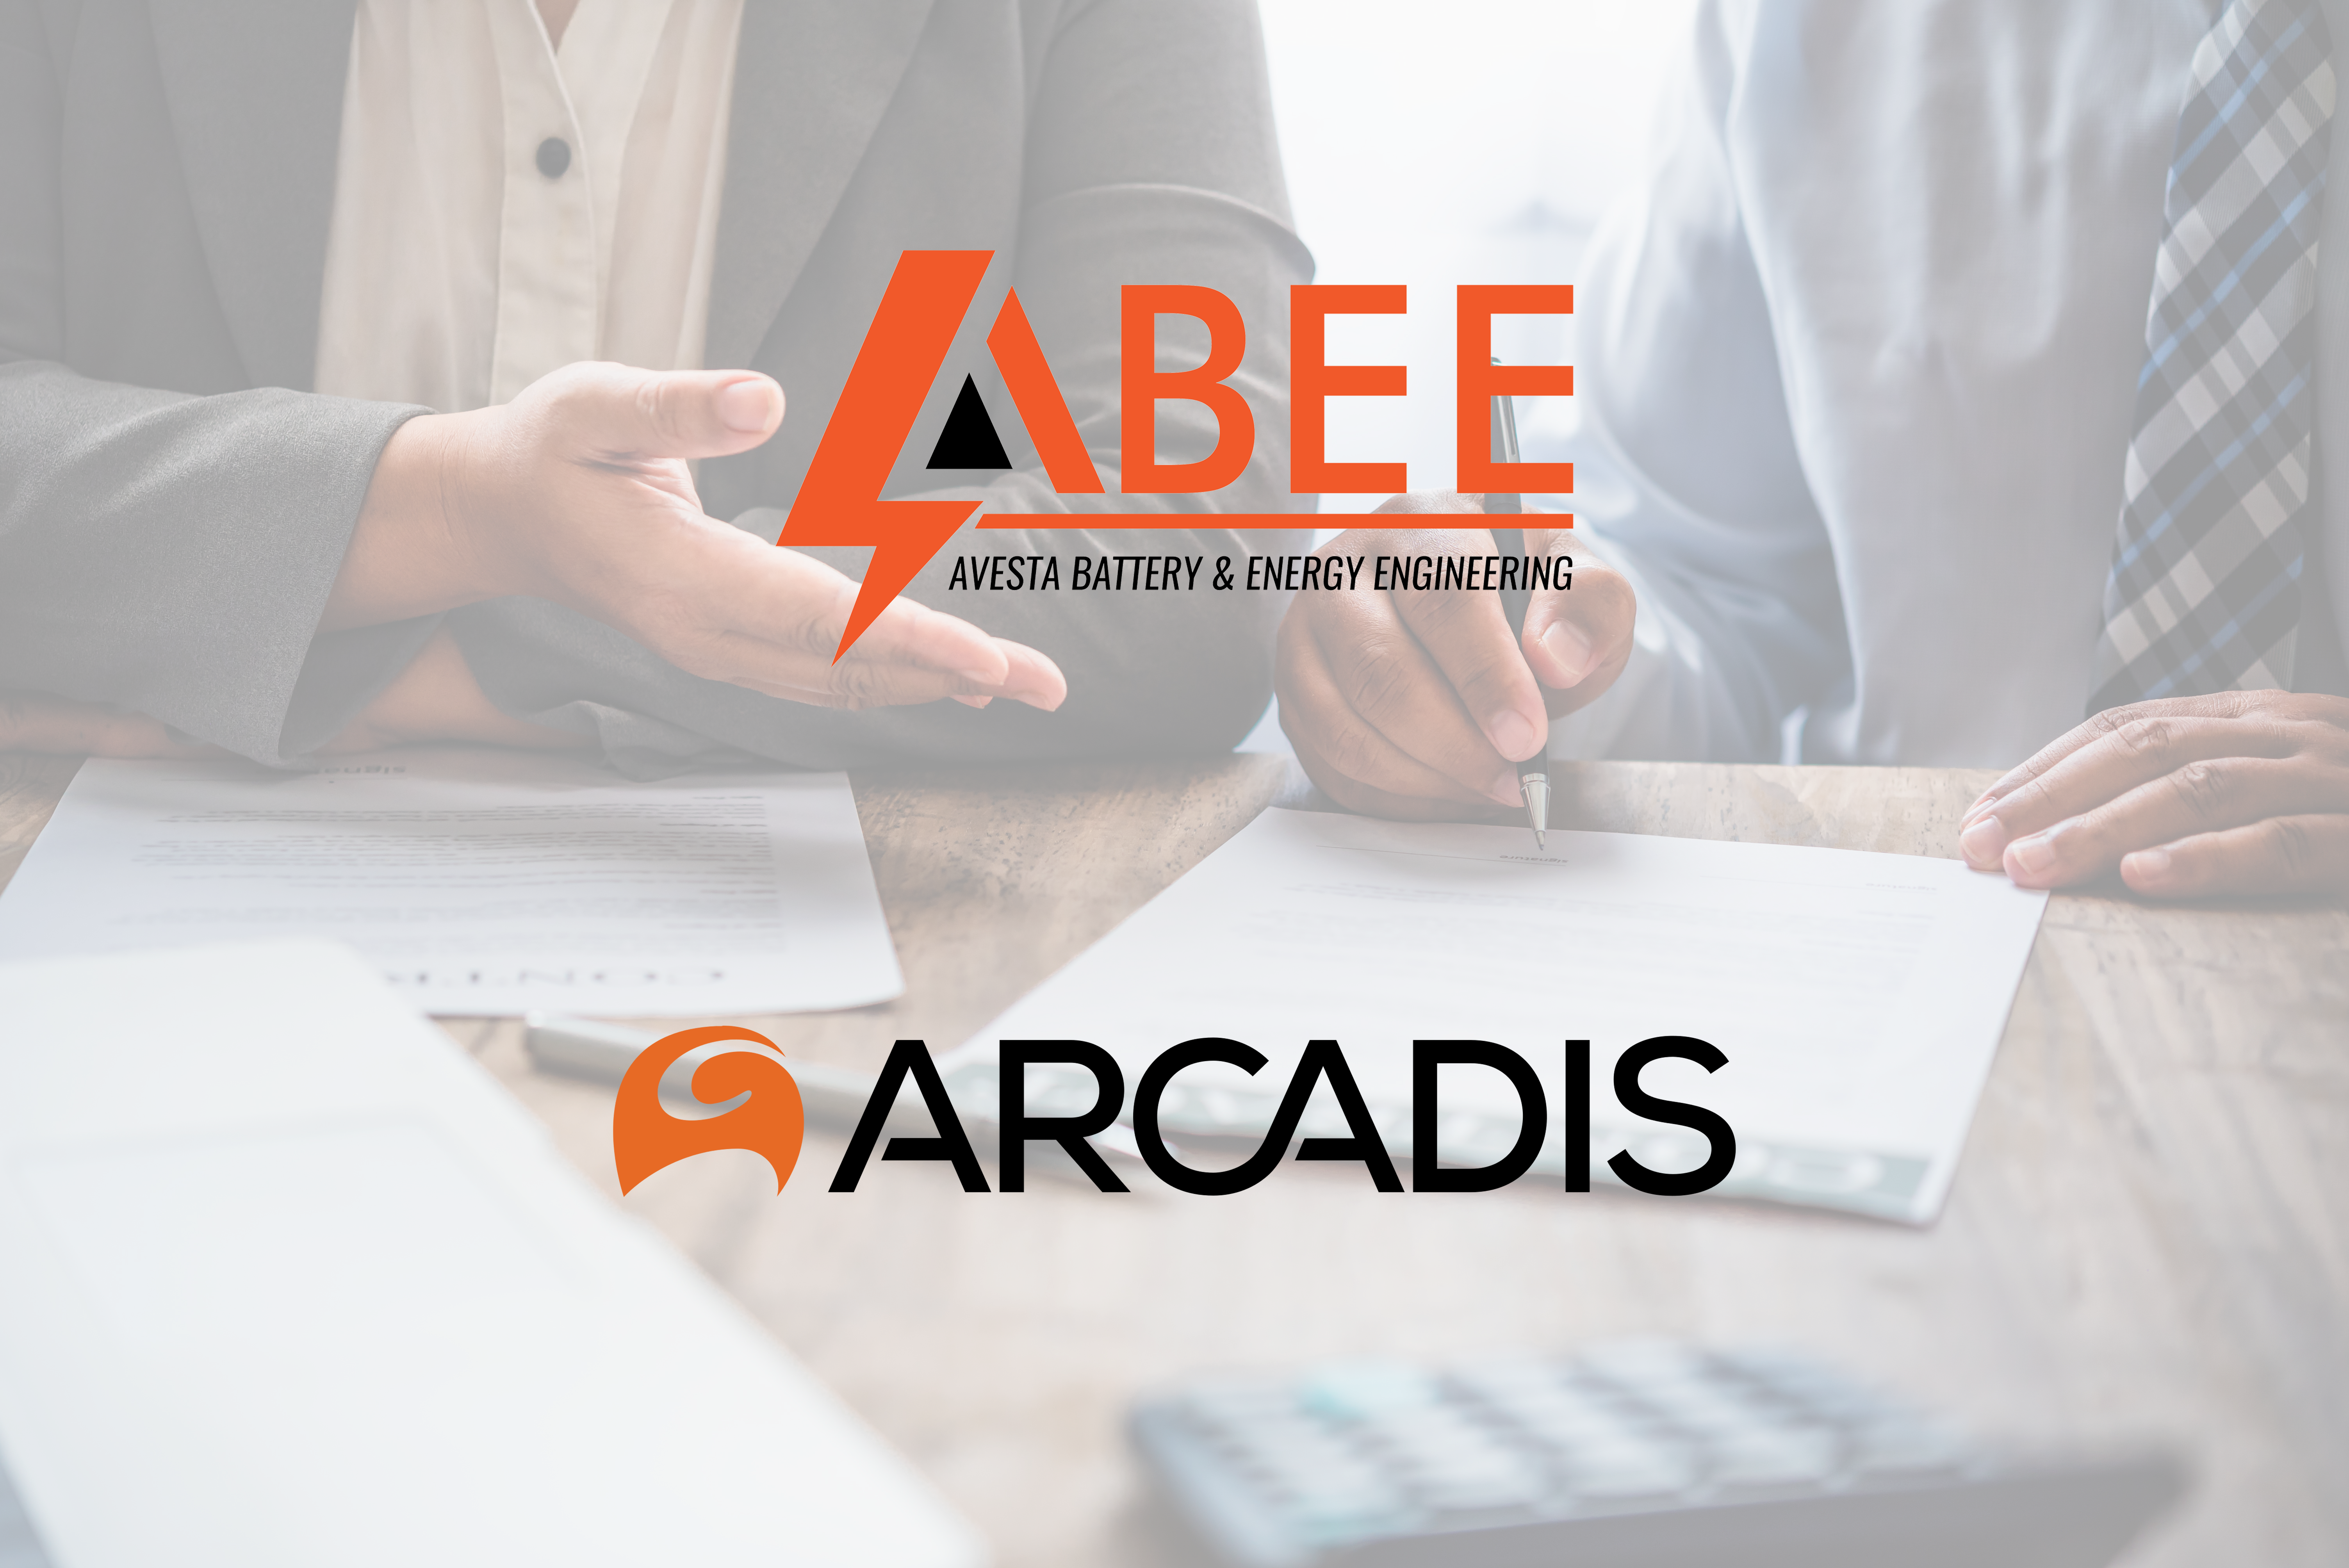 ABEE signs agreement with Arcadis